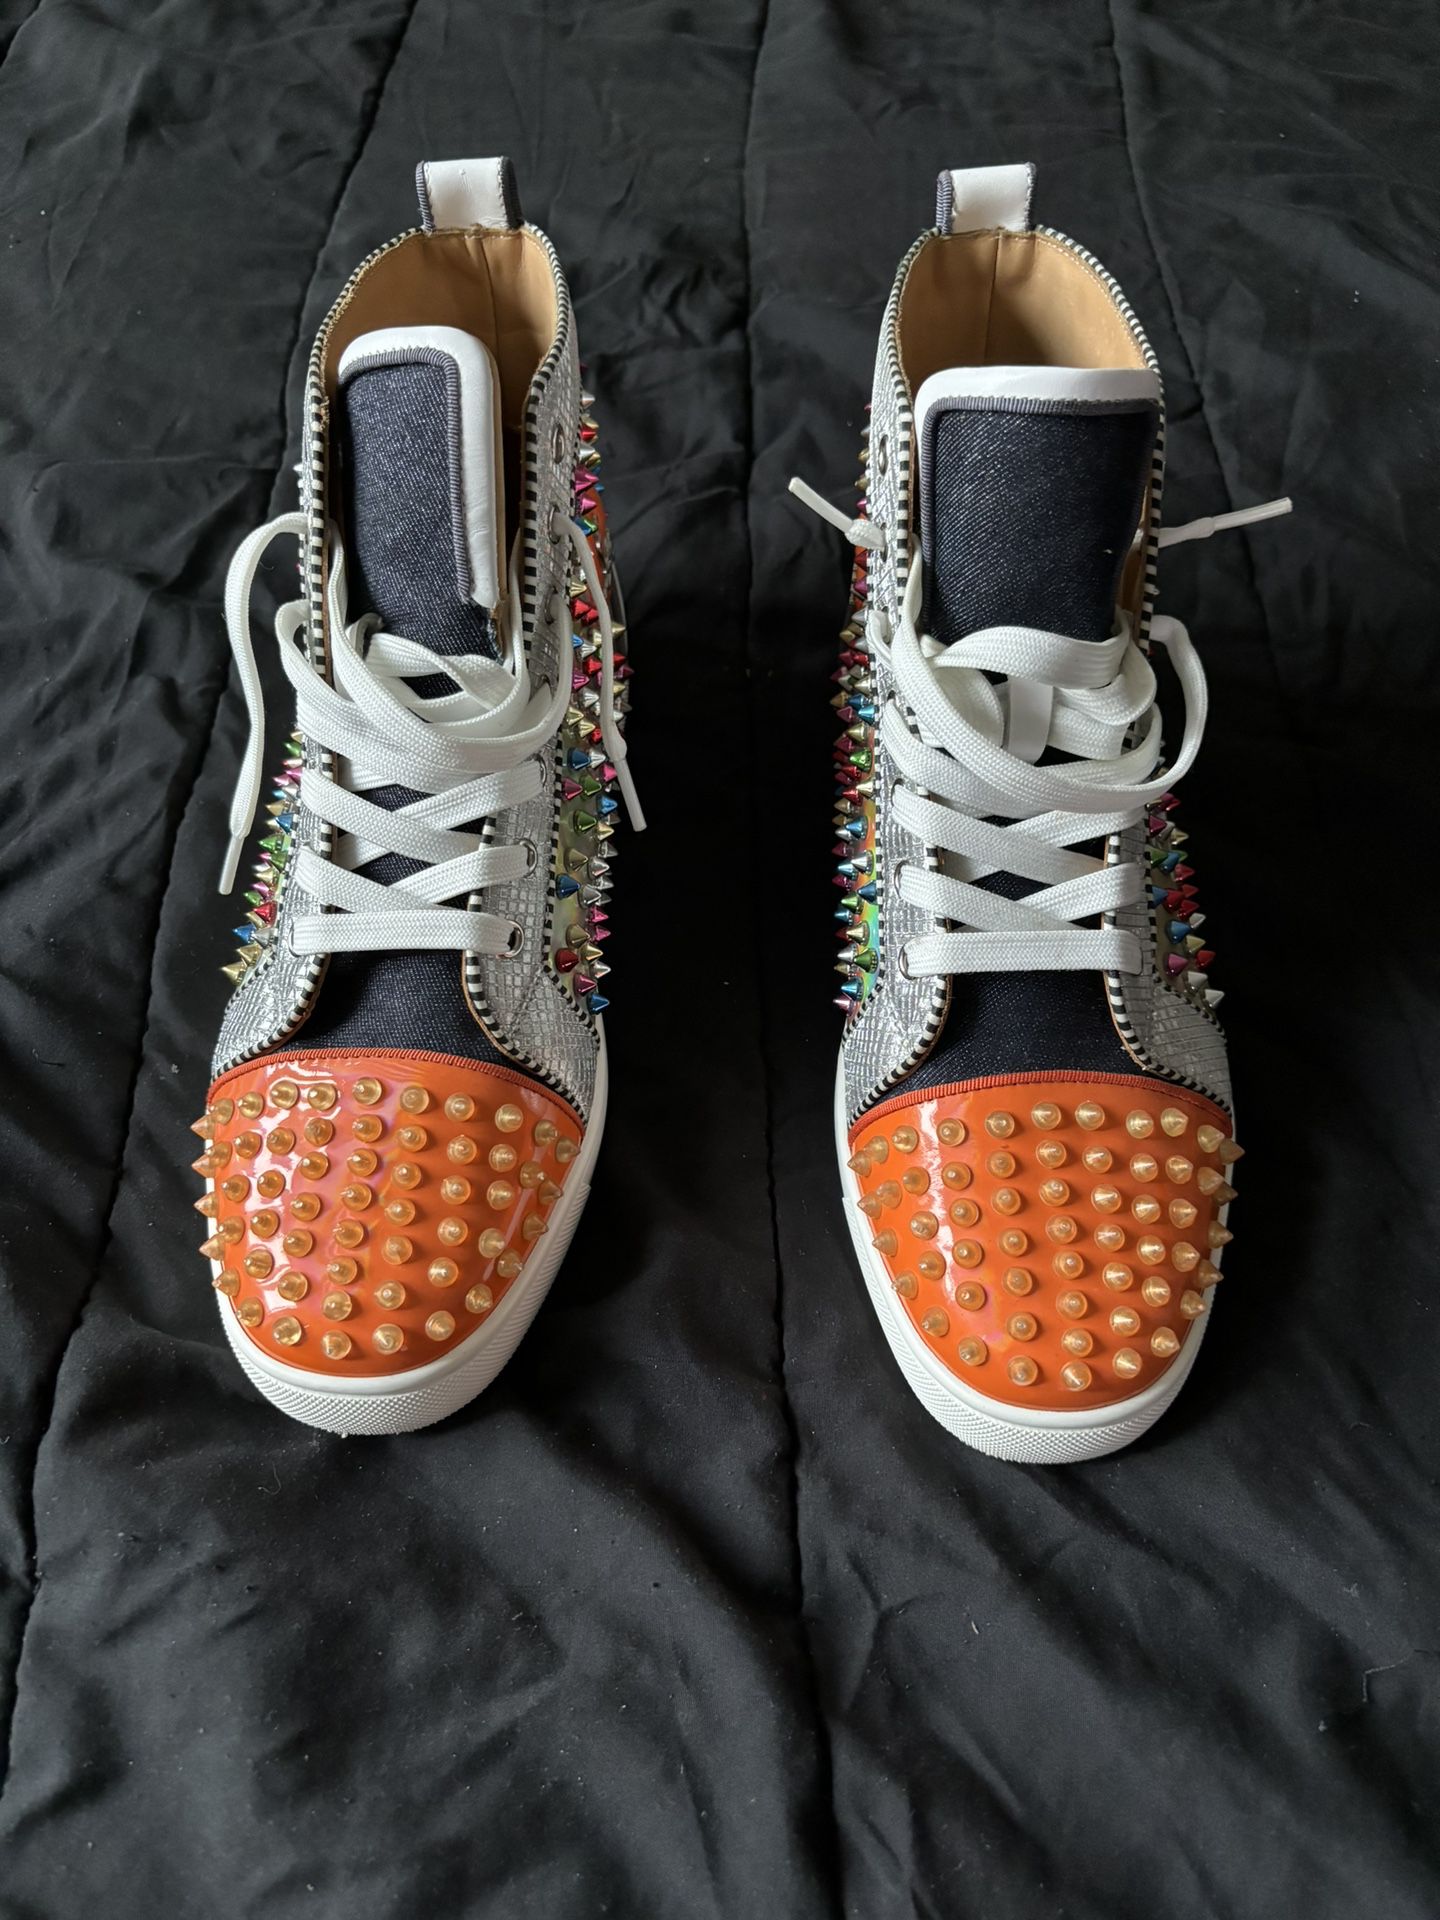 Christian Louboutin Spike Leather Trainers Size 43 (No Box Included, No Meet Ups, No TRADES)